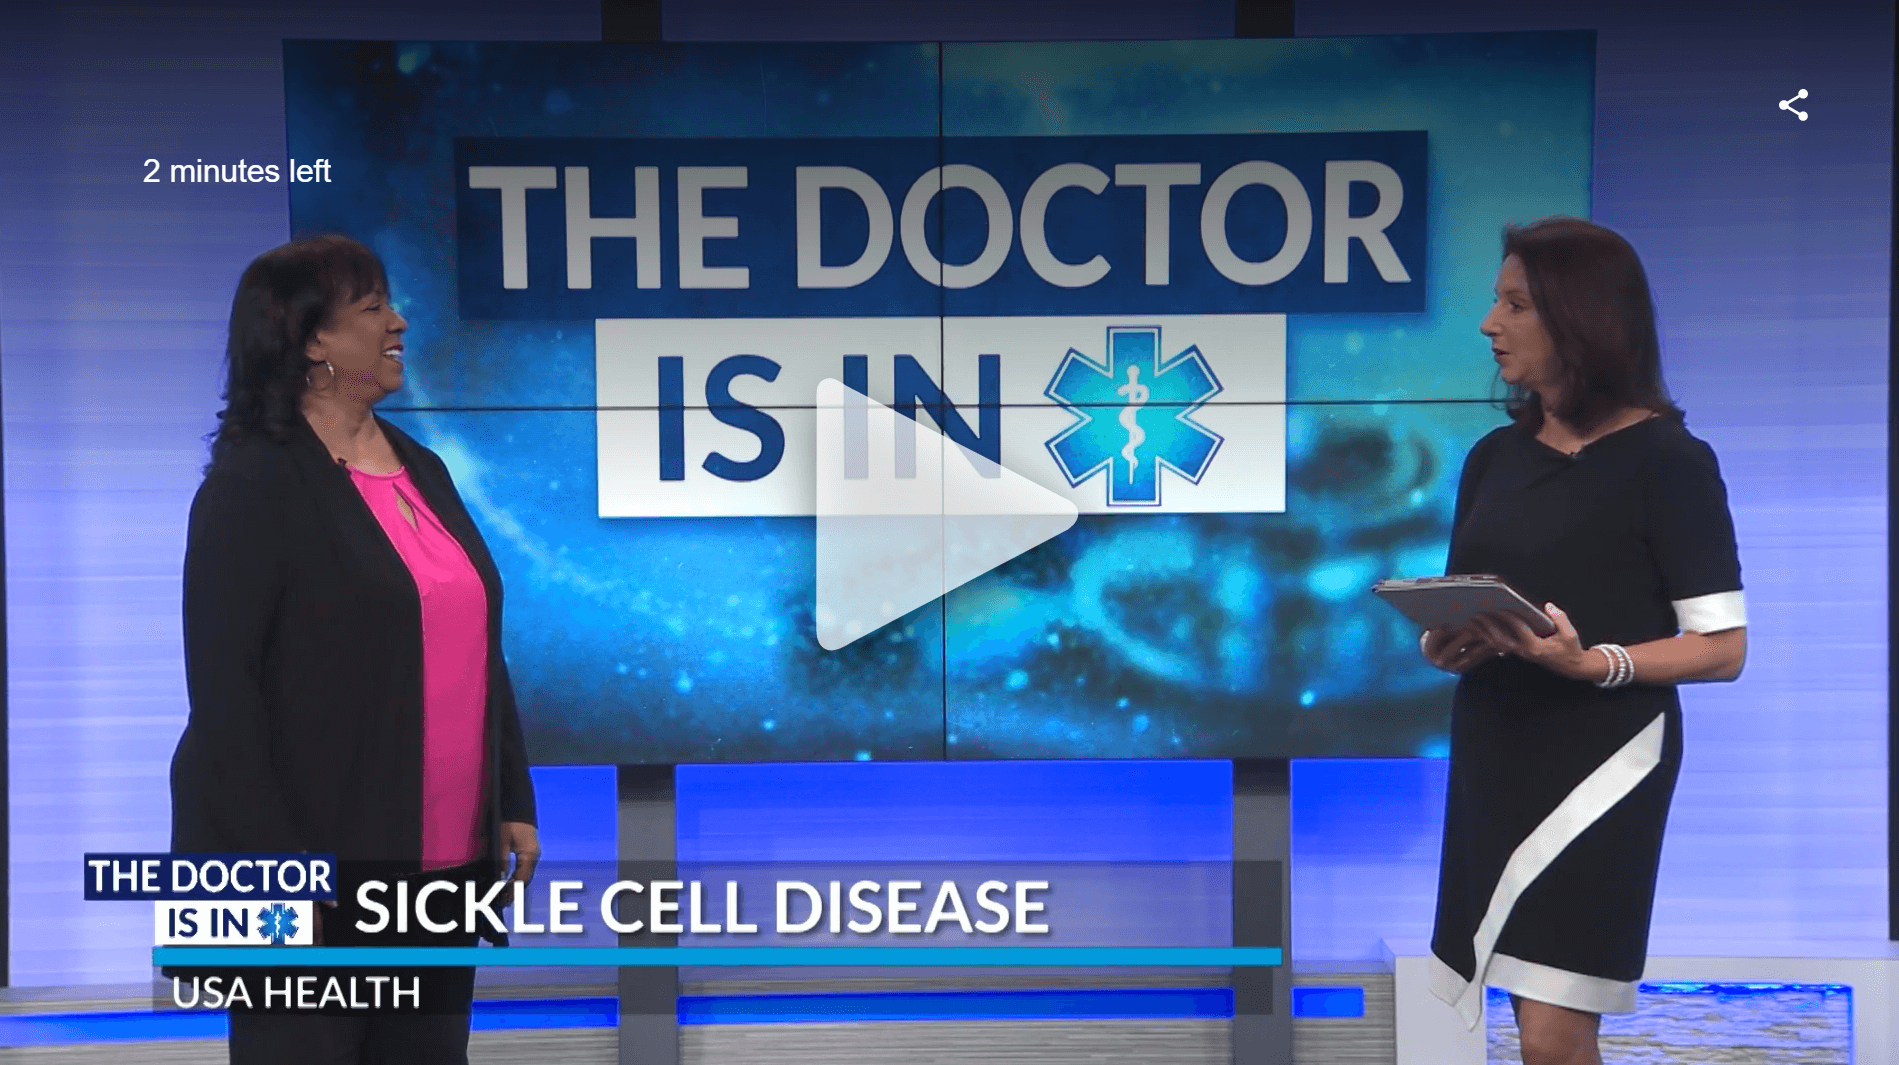 THE DOCTOR IS IN Sickle Cell Disease with Dr. Felicia Wilson